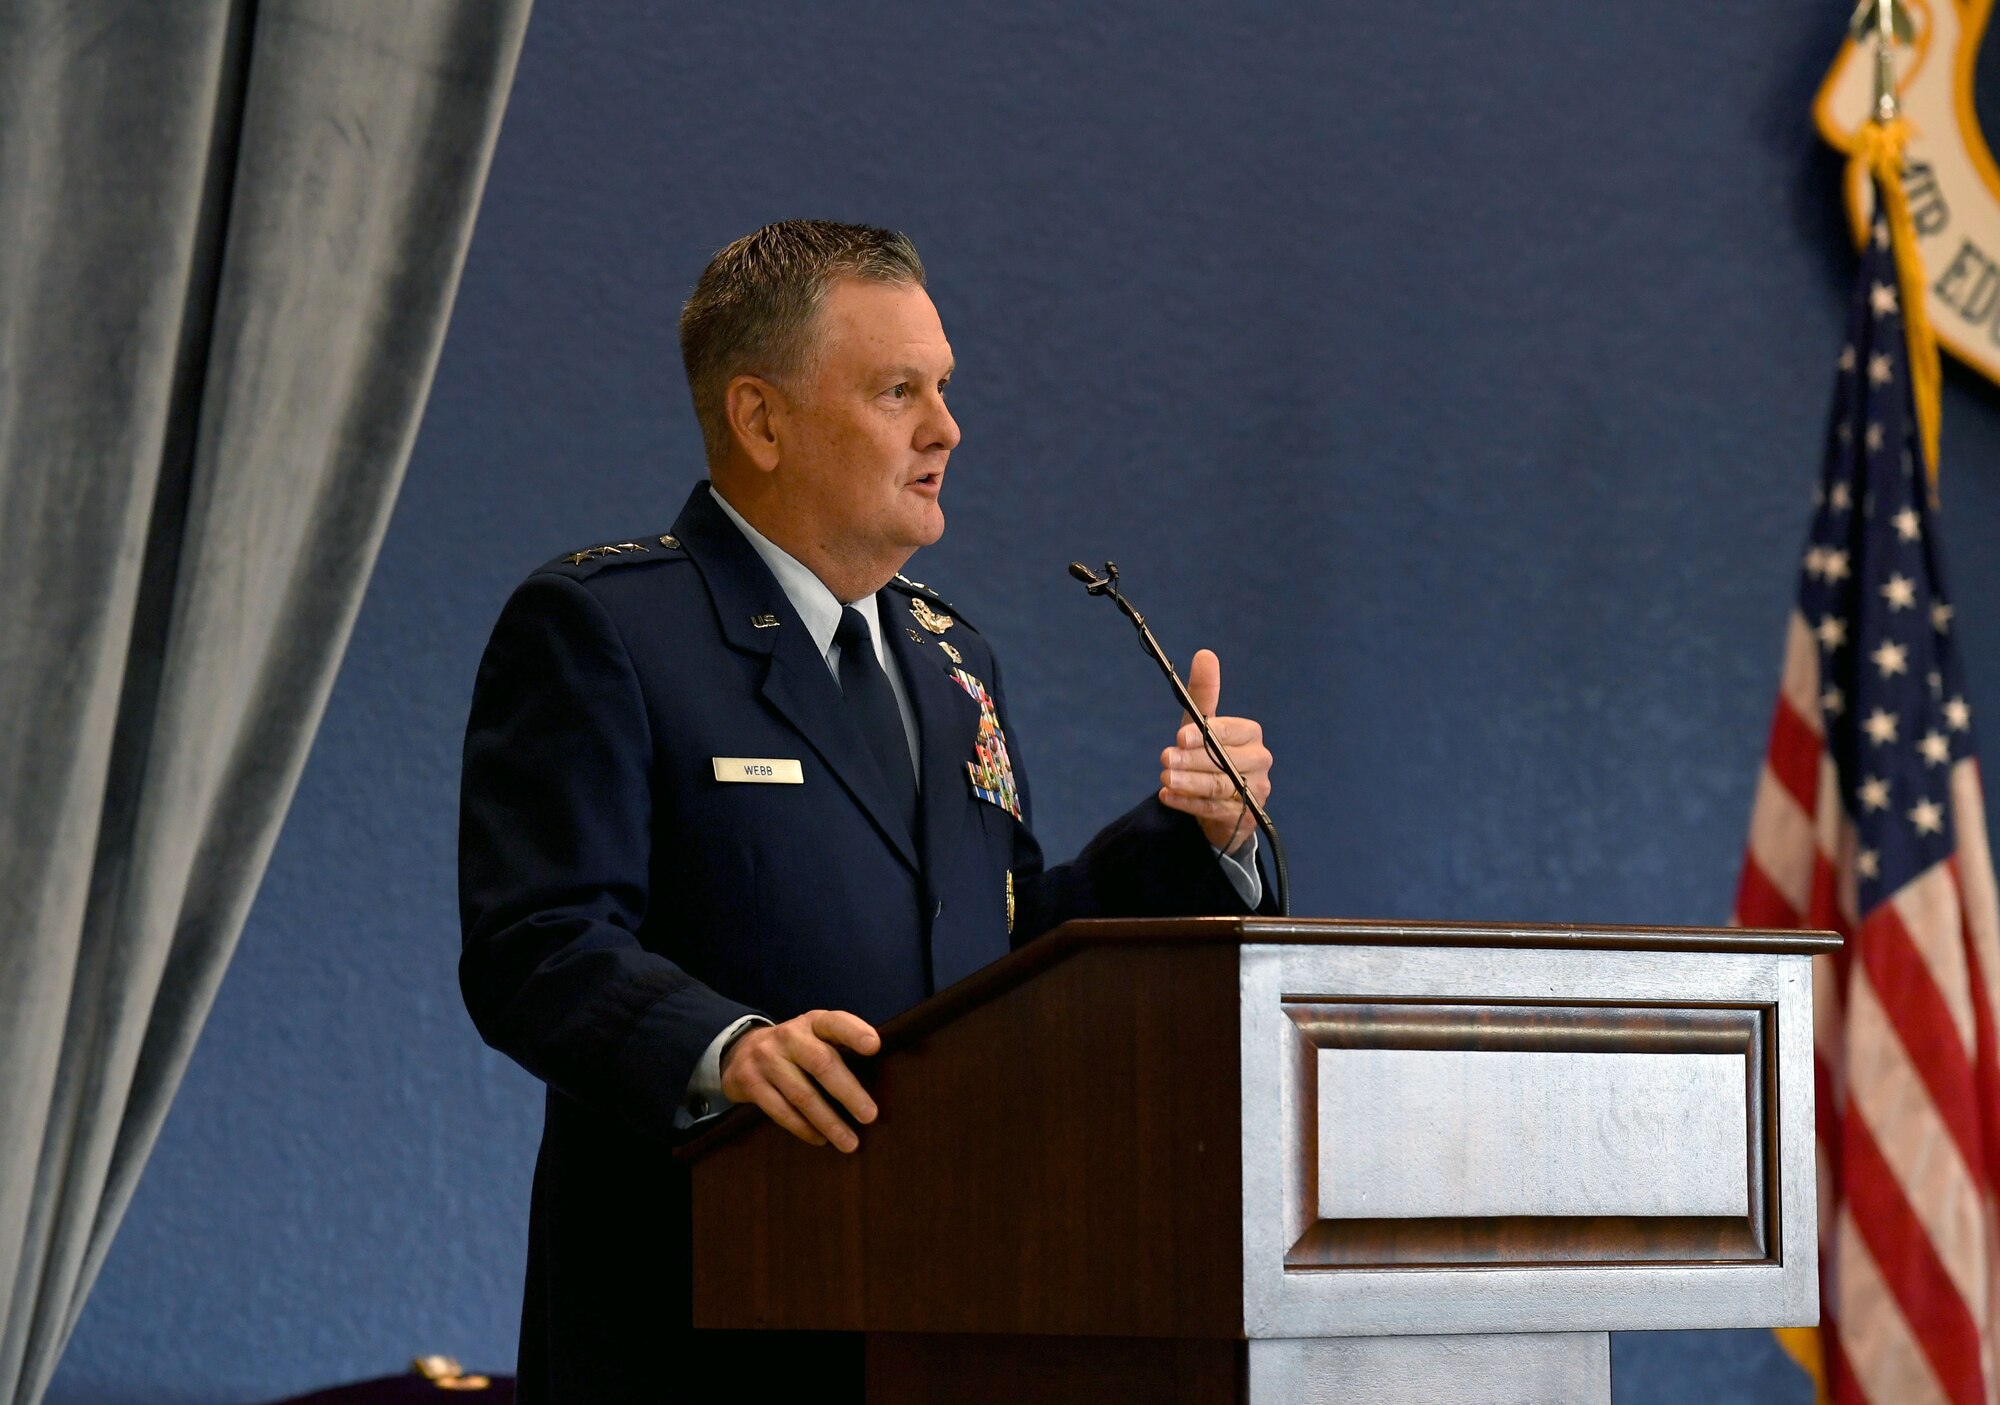 U.S. Air Force Lt. Gen. Brad Webb, commander of Air Education and Training Command, delivers remarks during the Second Air Force change of command ceremony inside the Bay Breeze Event Center at Keesler Air Force Base, Mississippi, July 30, 2021. The ceremony is a symbol of command being exchanged from one commander to the next. Maj. Gen. Andrea Tullos relinquished command of the Second Air Force to Maj. Gen. Michele Edmondson. (U.S. Air Force photo by Kemberly Groue)